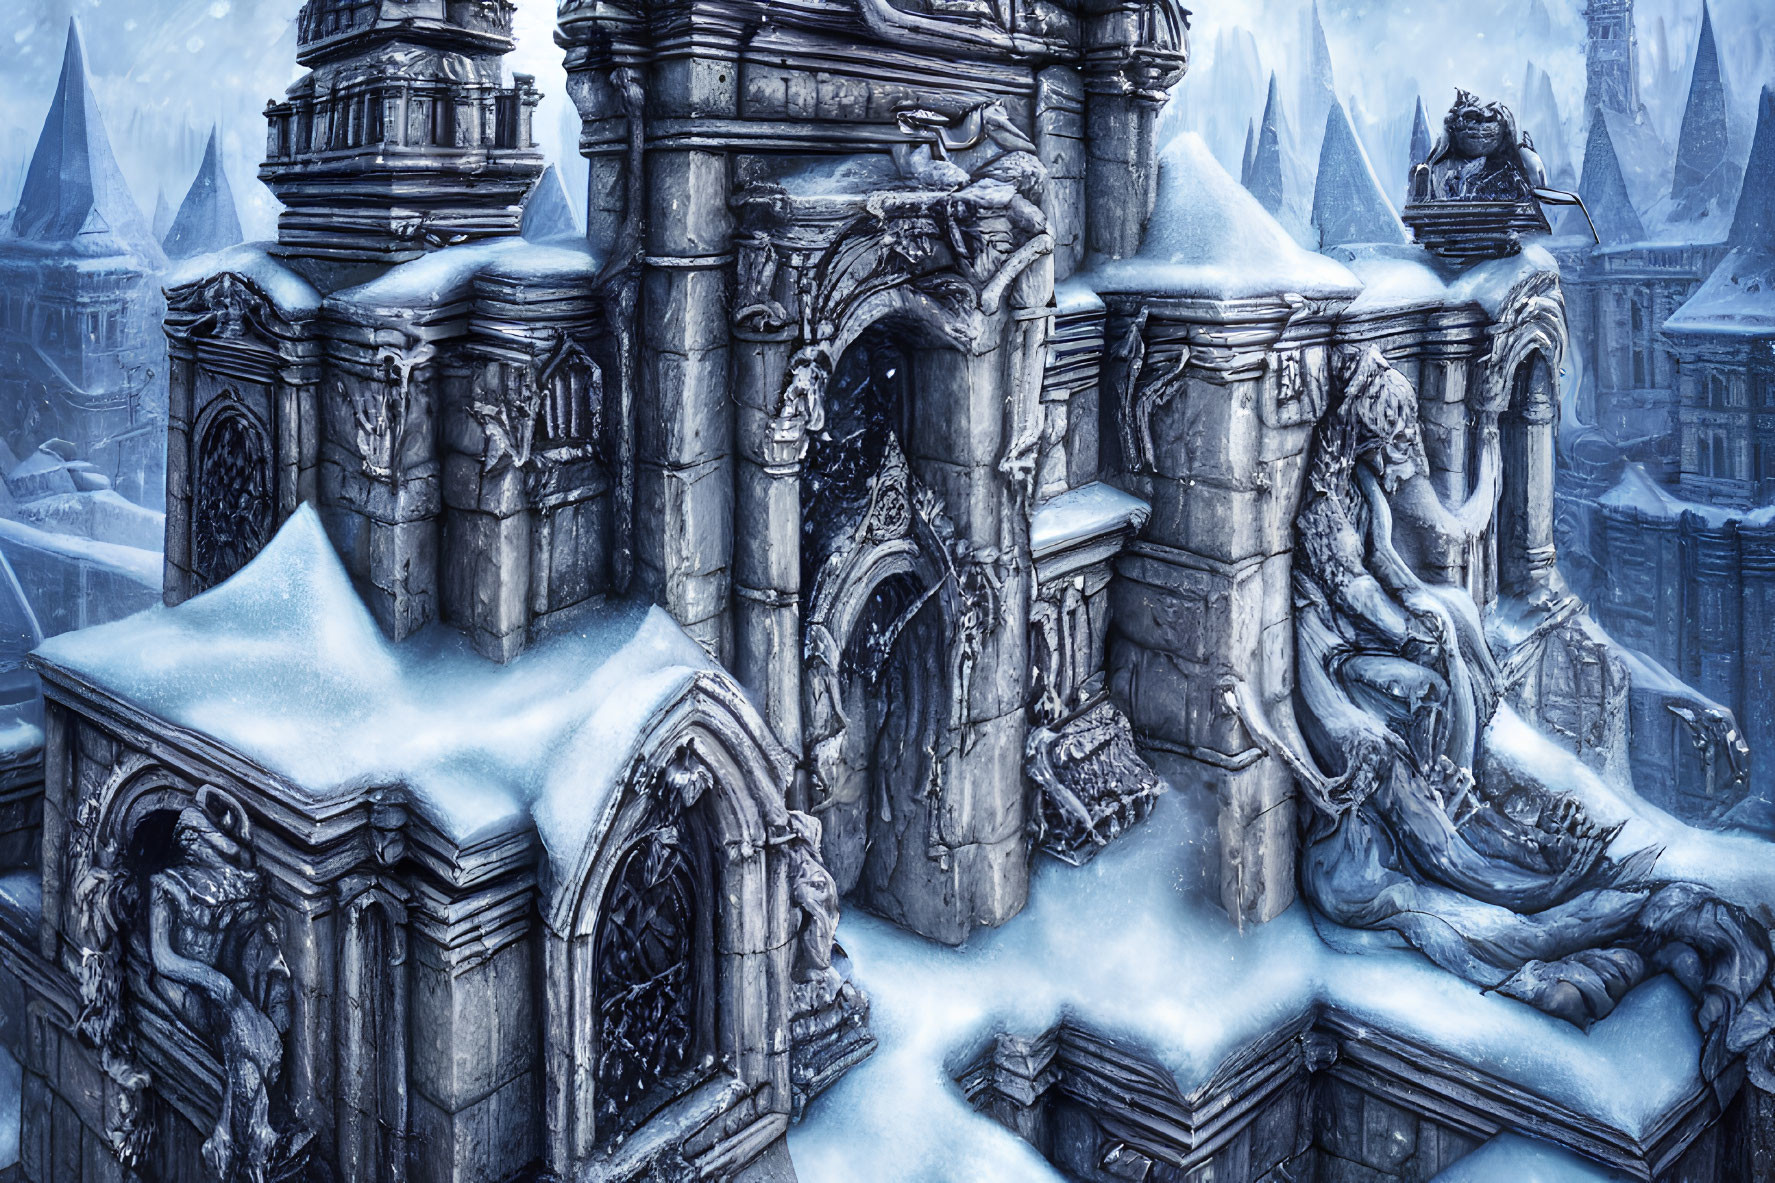 Snow-covered gothic structure with dragon statues in a blizzard